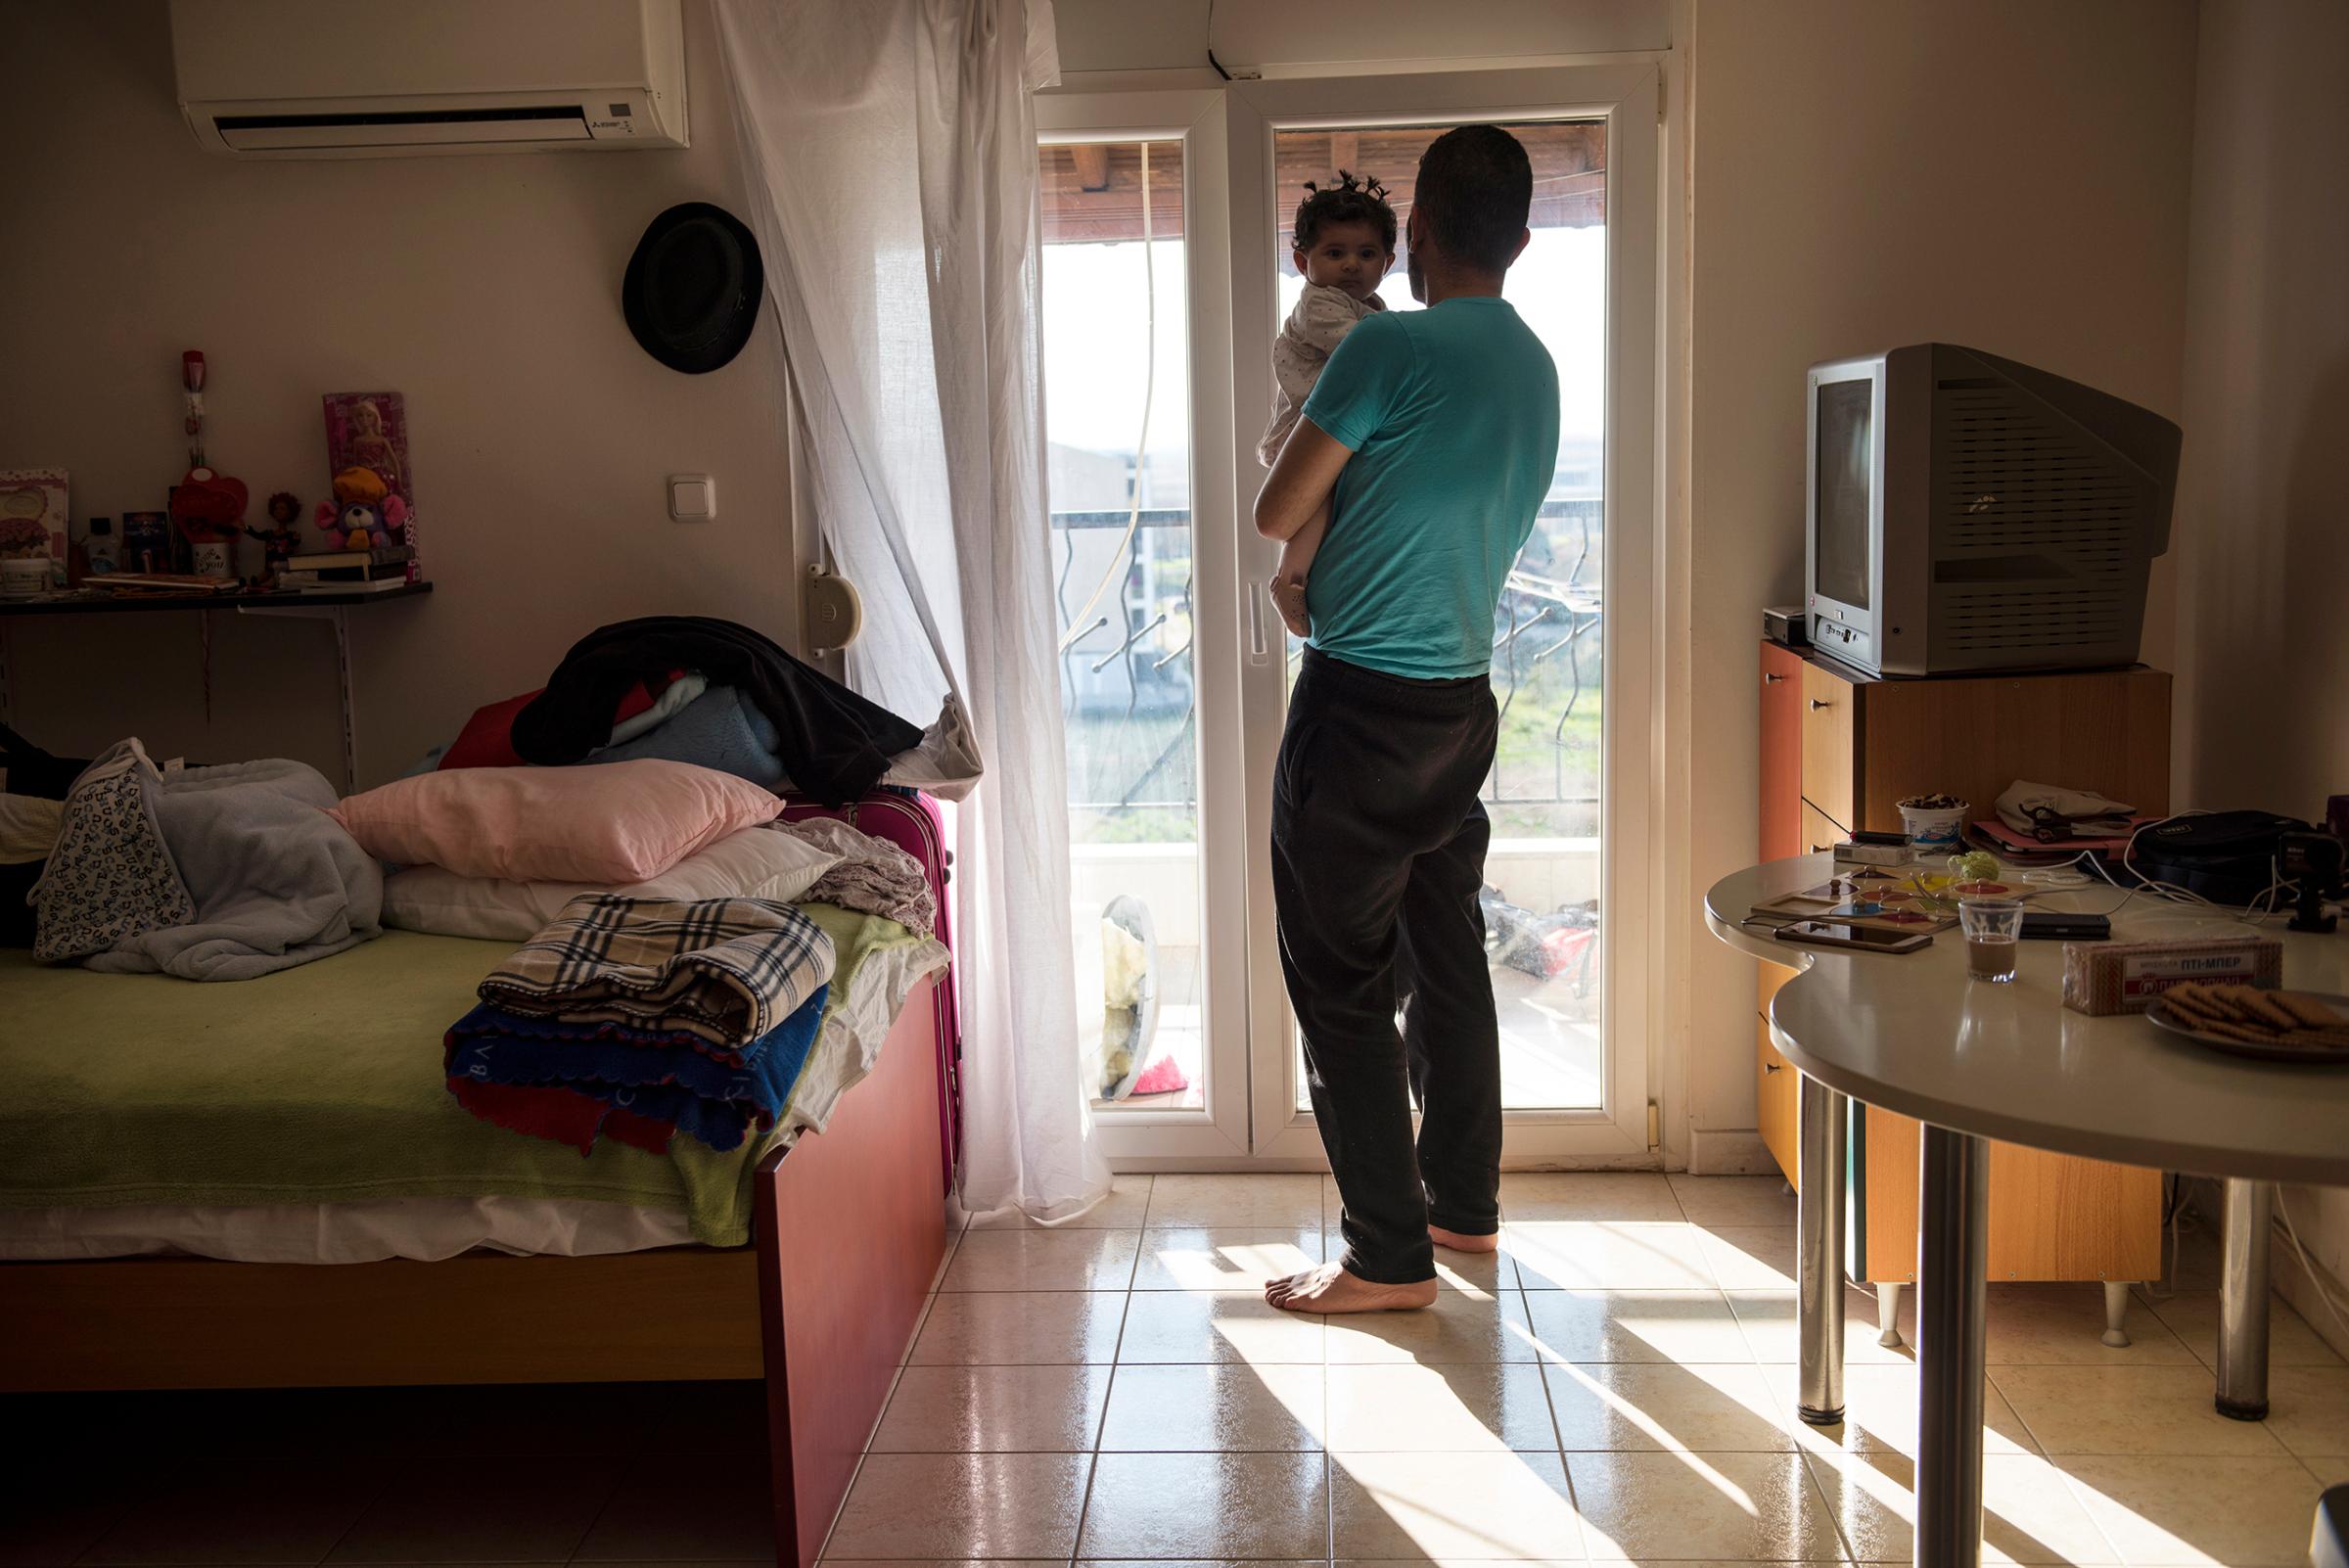 Yousuf Arsan, 27, sings to baby Rahaf, almost 6 months, while his wife (not shown) Noor Al Talaa, 22, cooks lunch at an apartment in Sidros, outside of Thessaloniki, Greece, March 28, 2017.